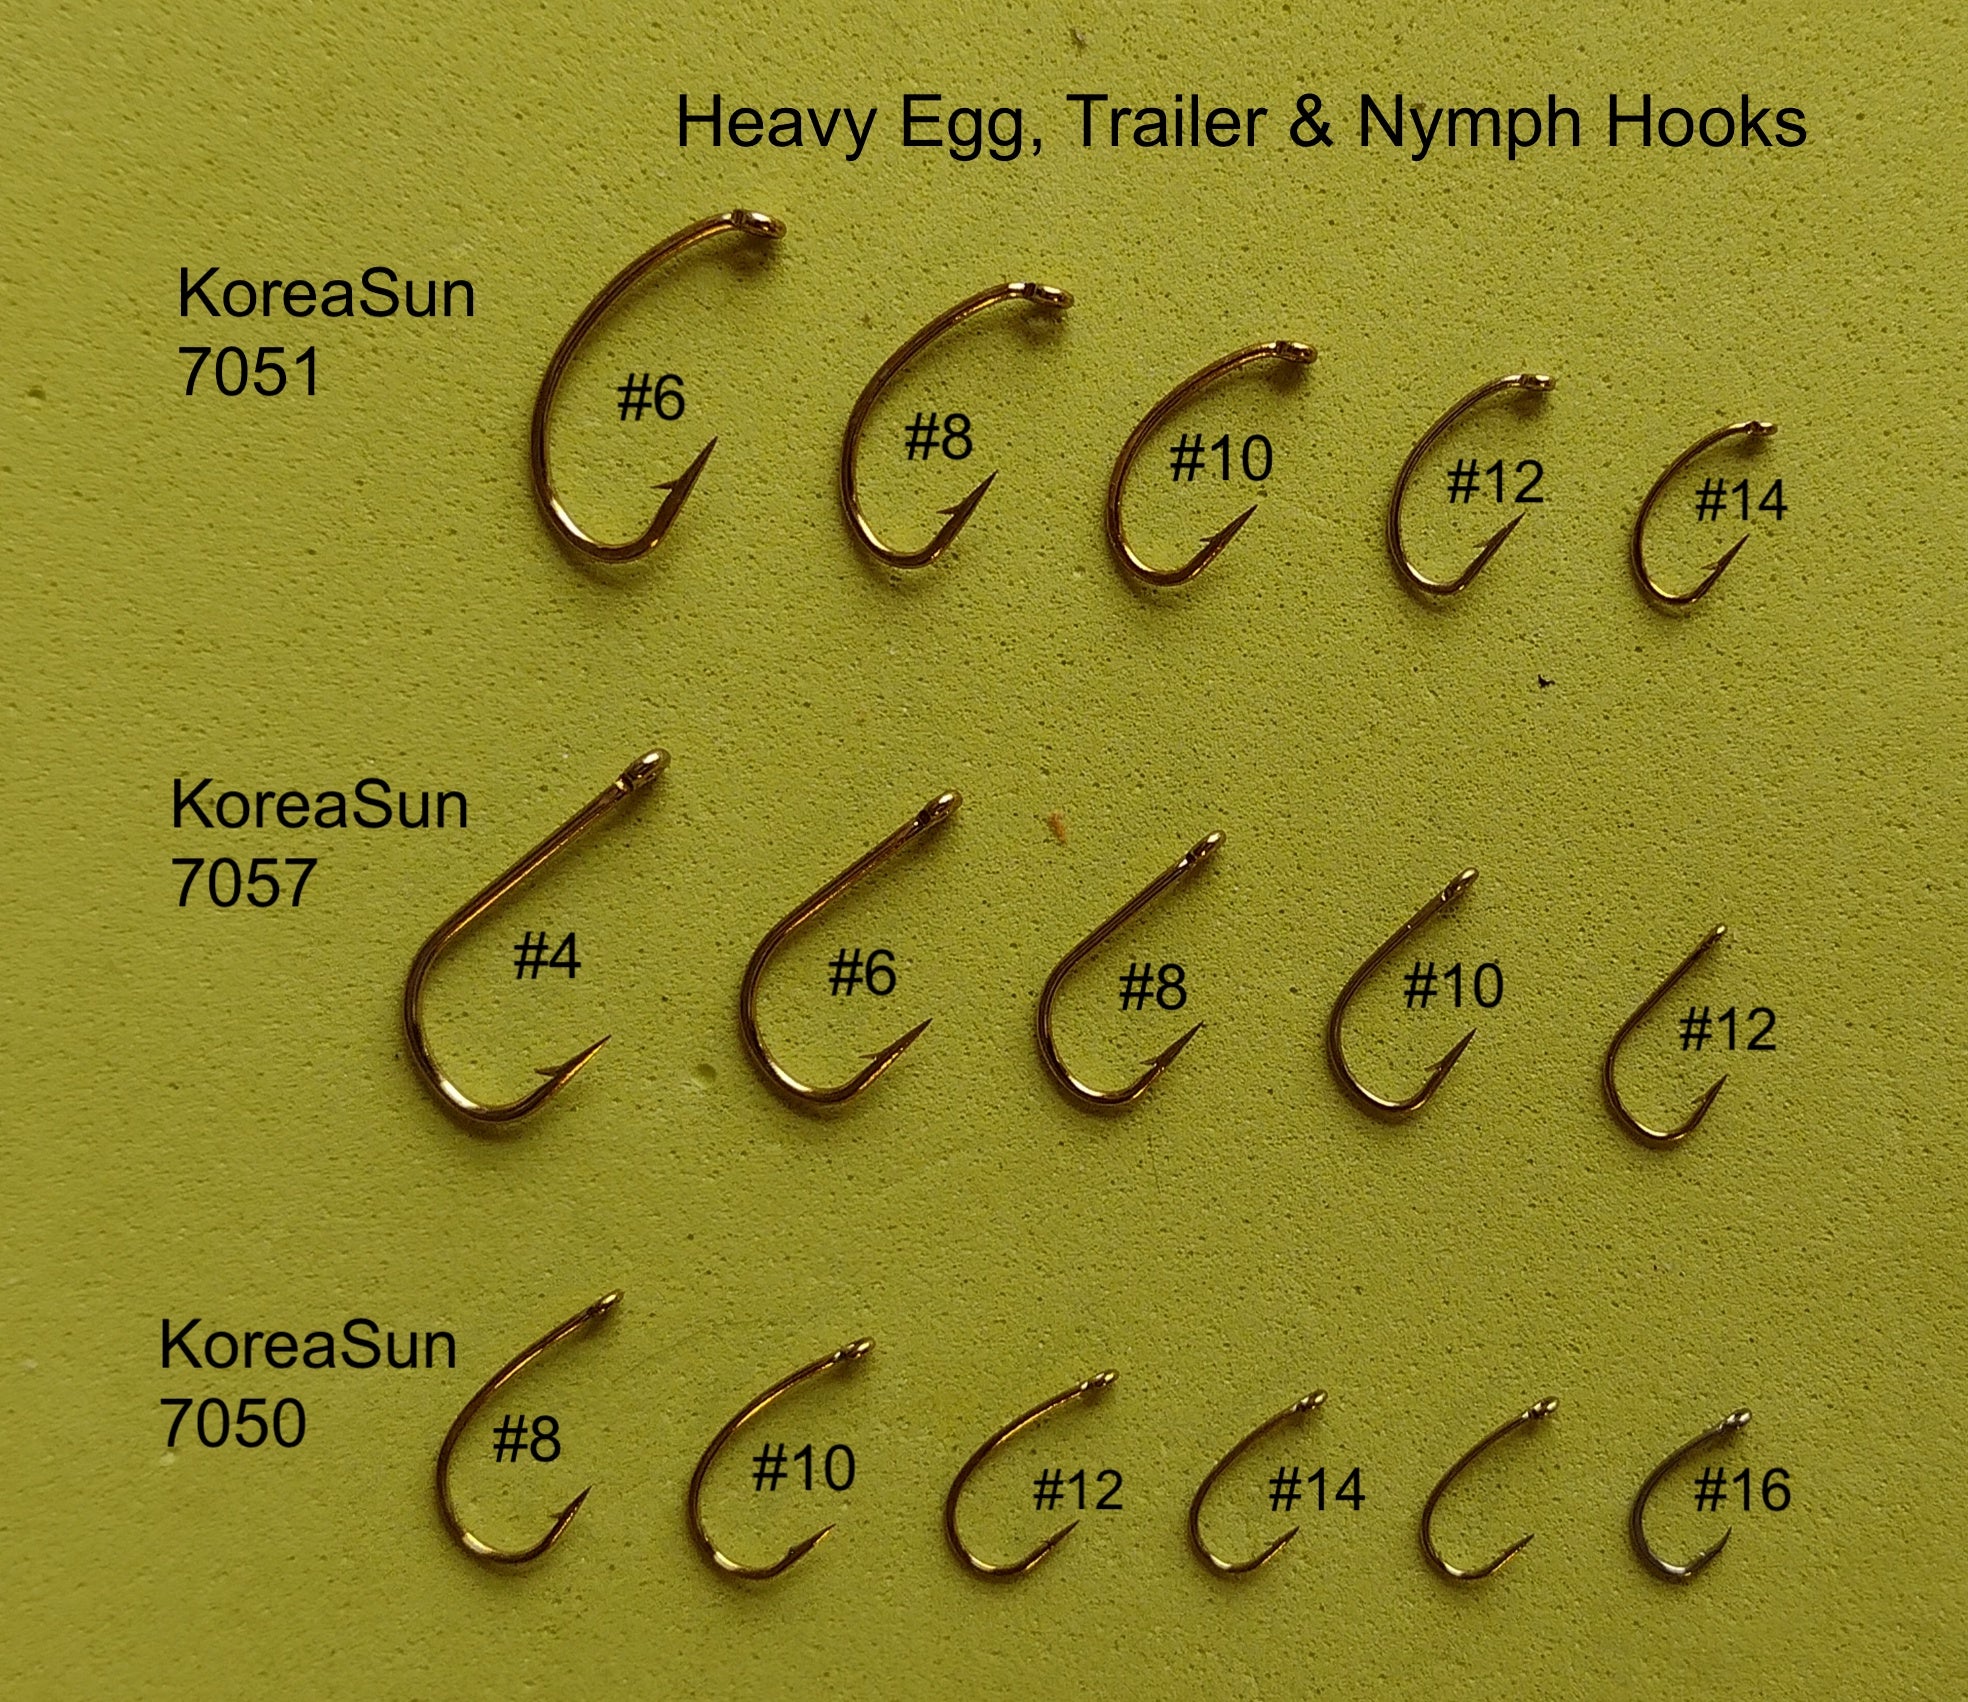 Heavy Egg and Scud Hooks